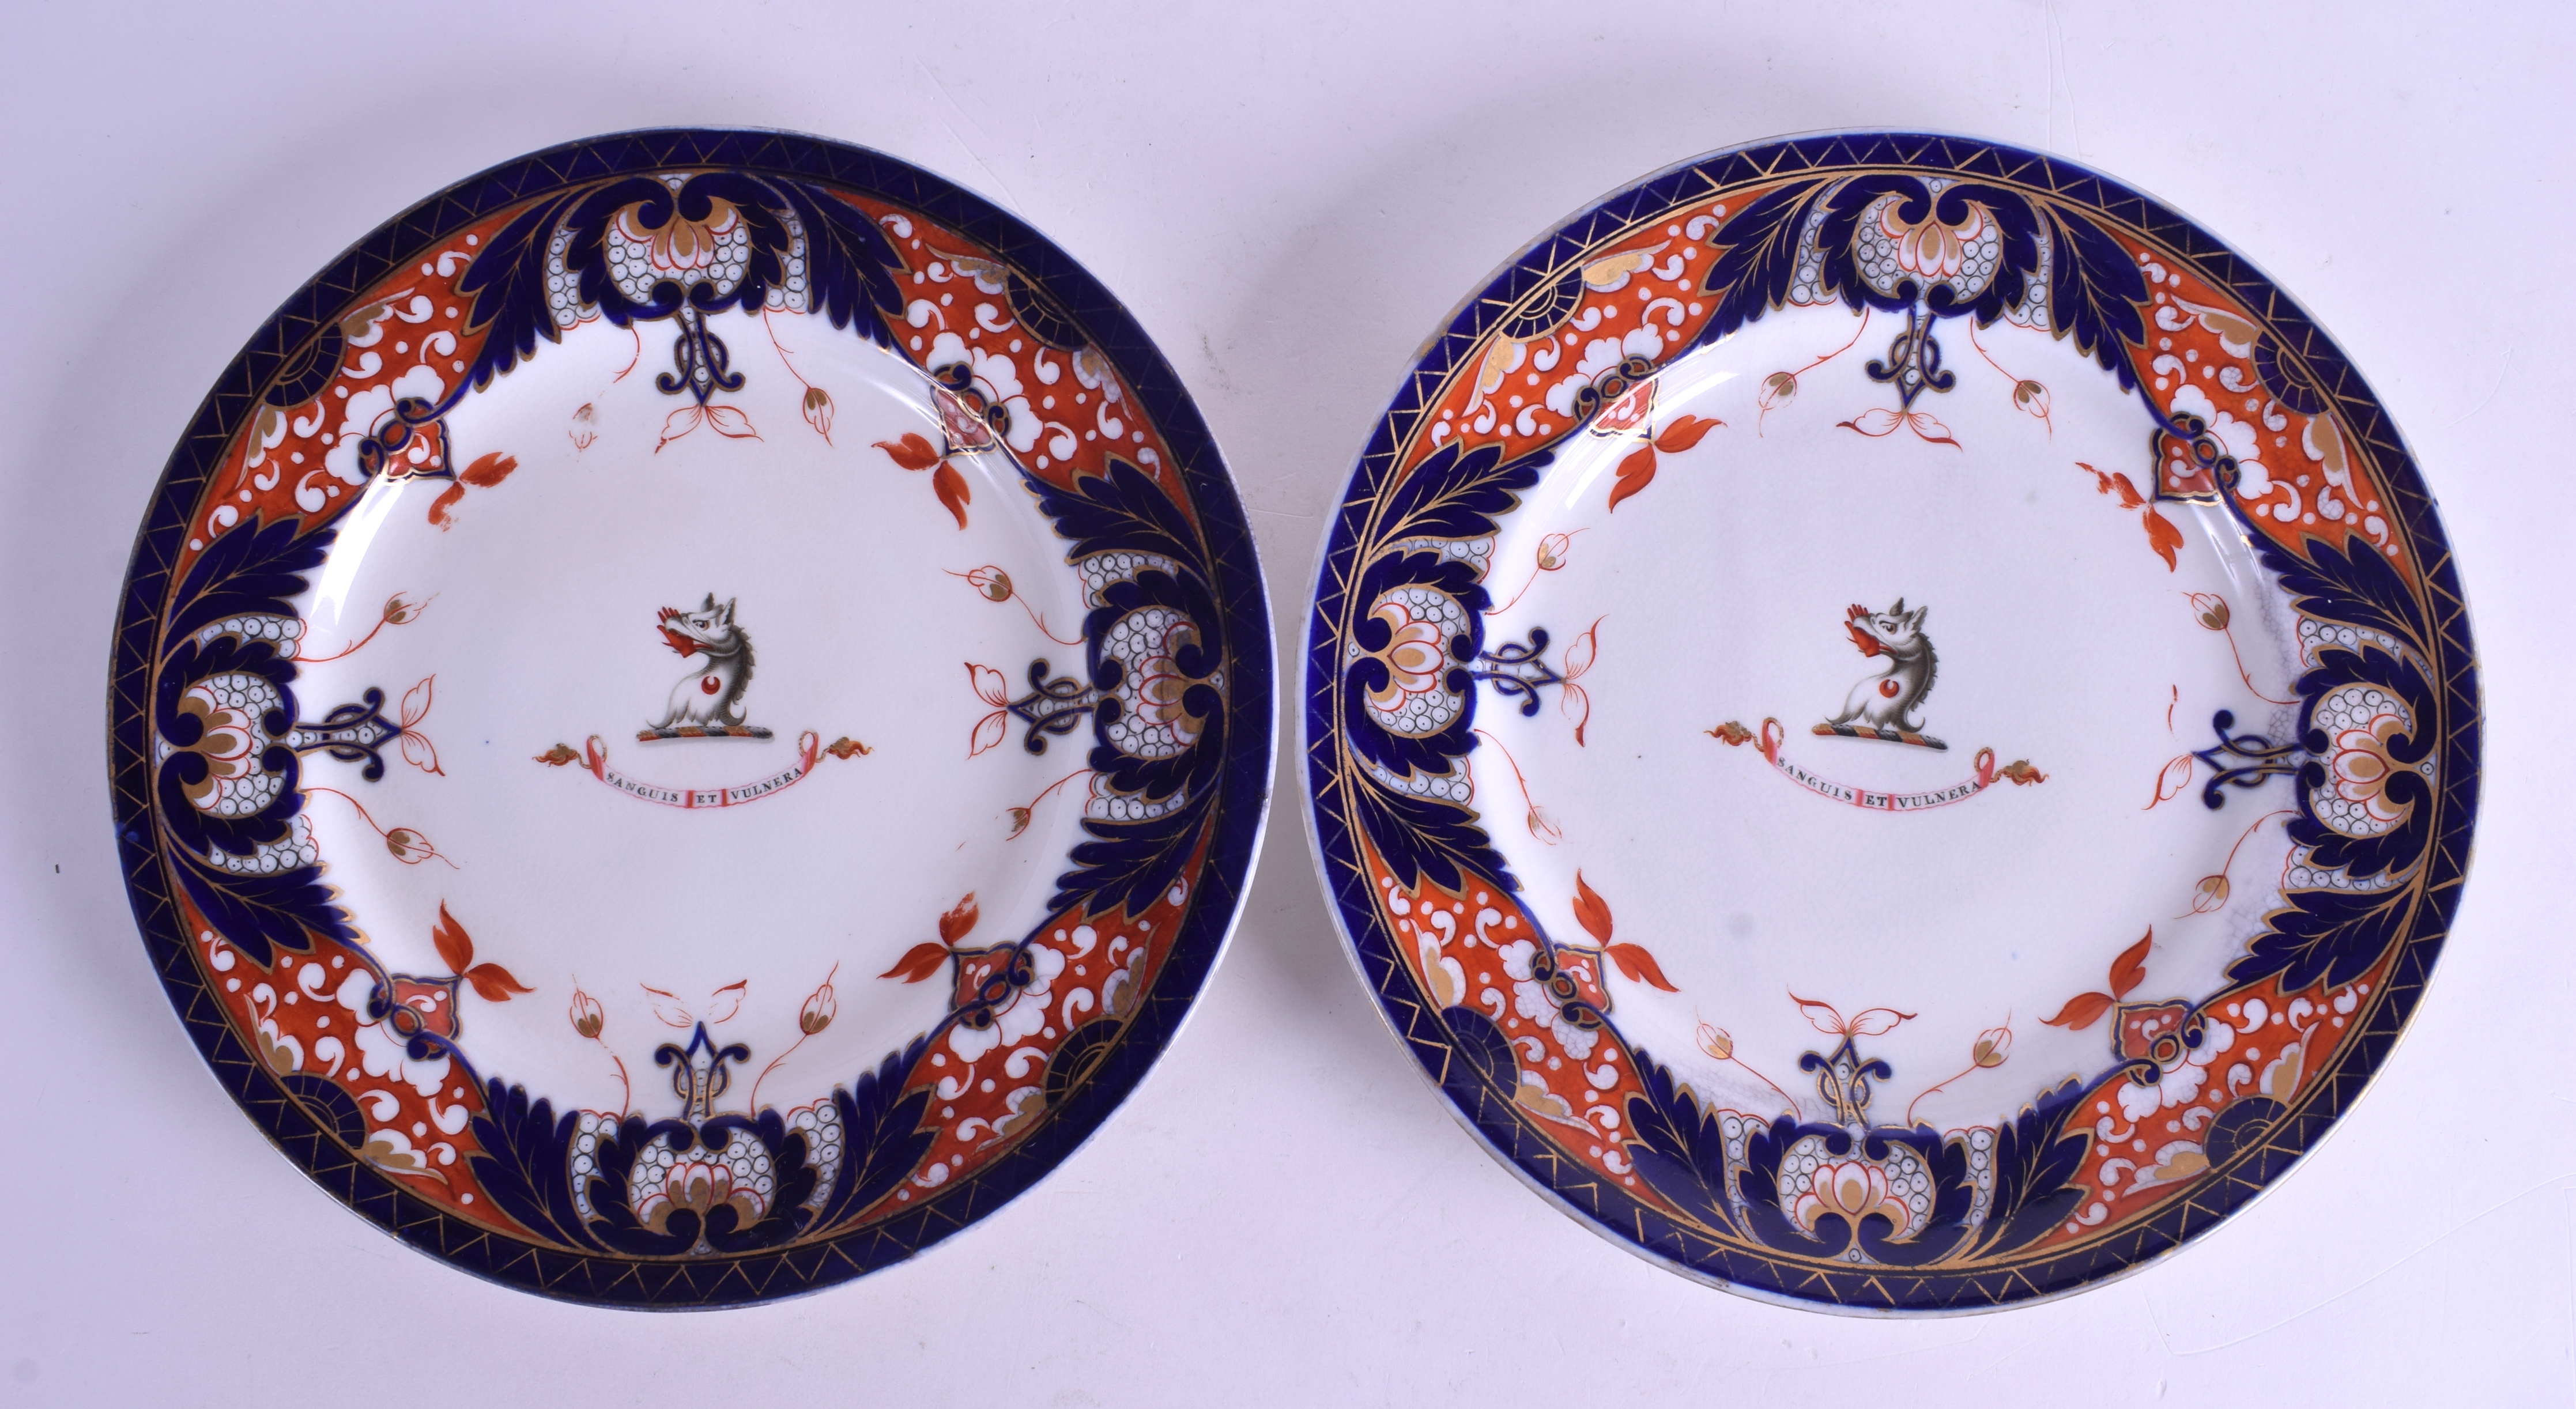 A PAIR OF MID 19TH CENTURY CHAMBERLAINS WORCESTER PLATES painted with the crest of the Skinner Fami